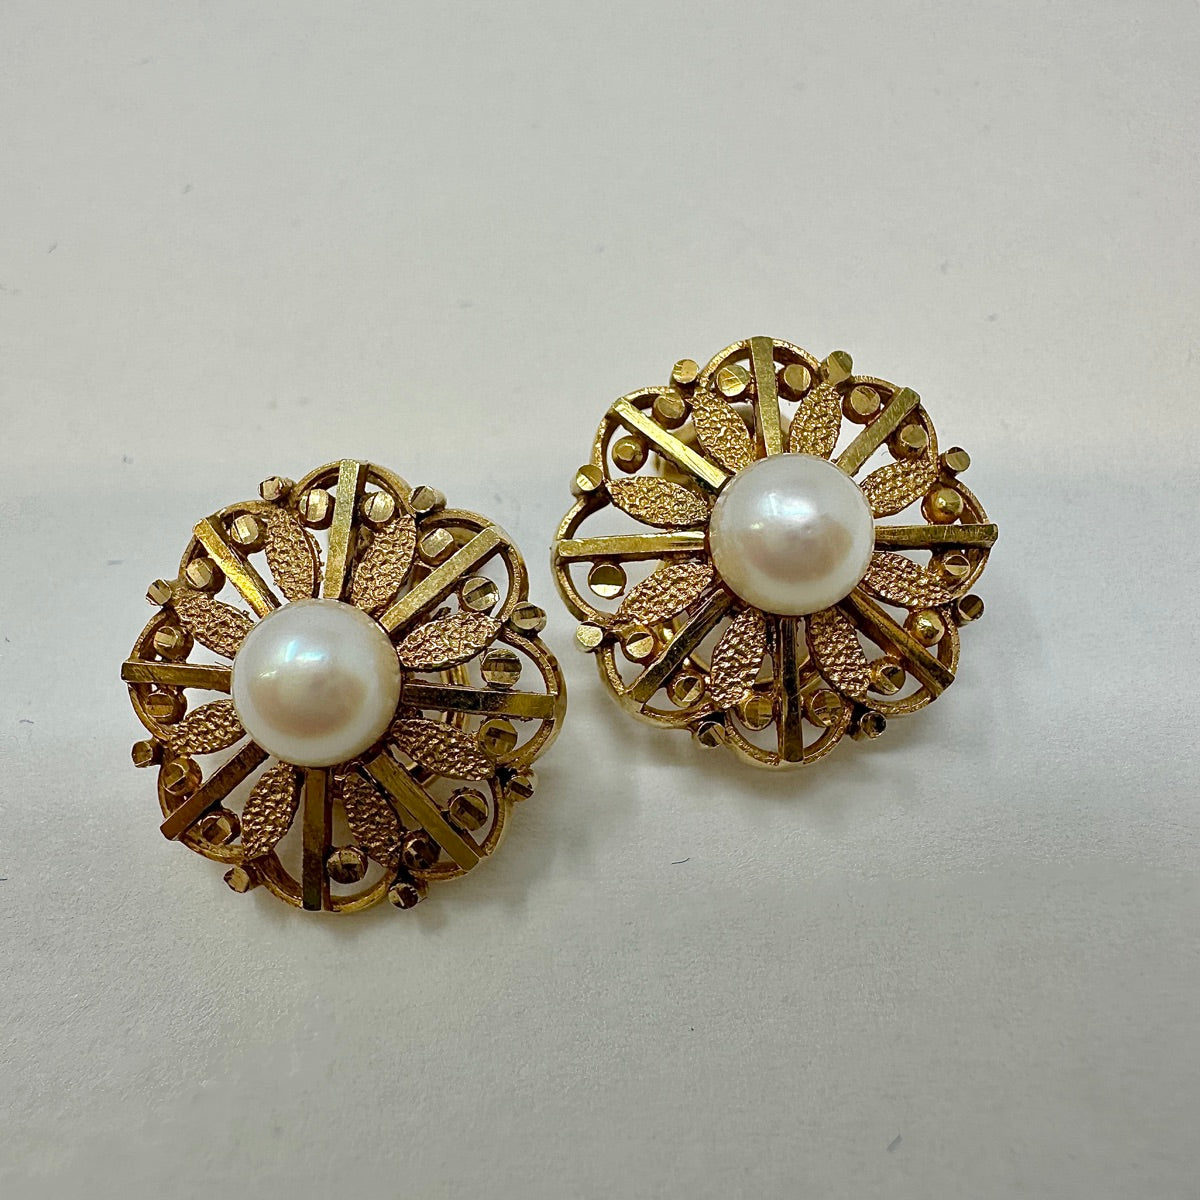 14K Gold Vintage Clip-on Earrings with Pearl